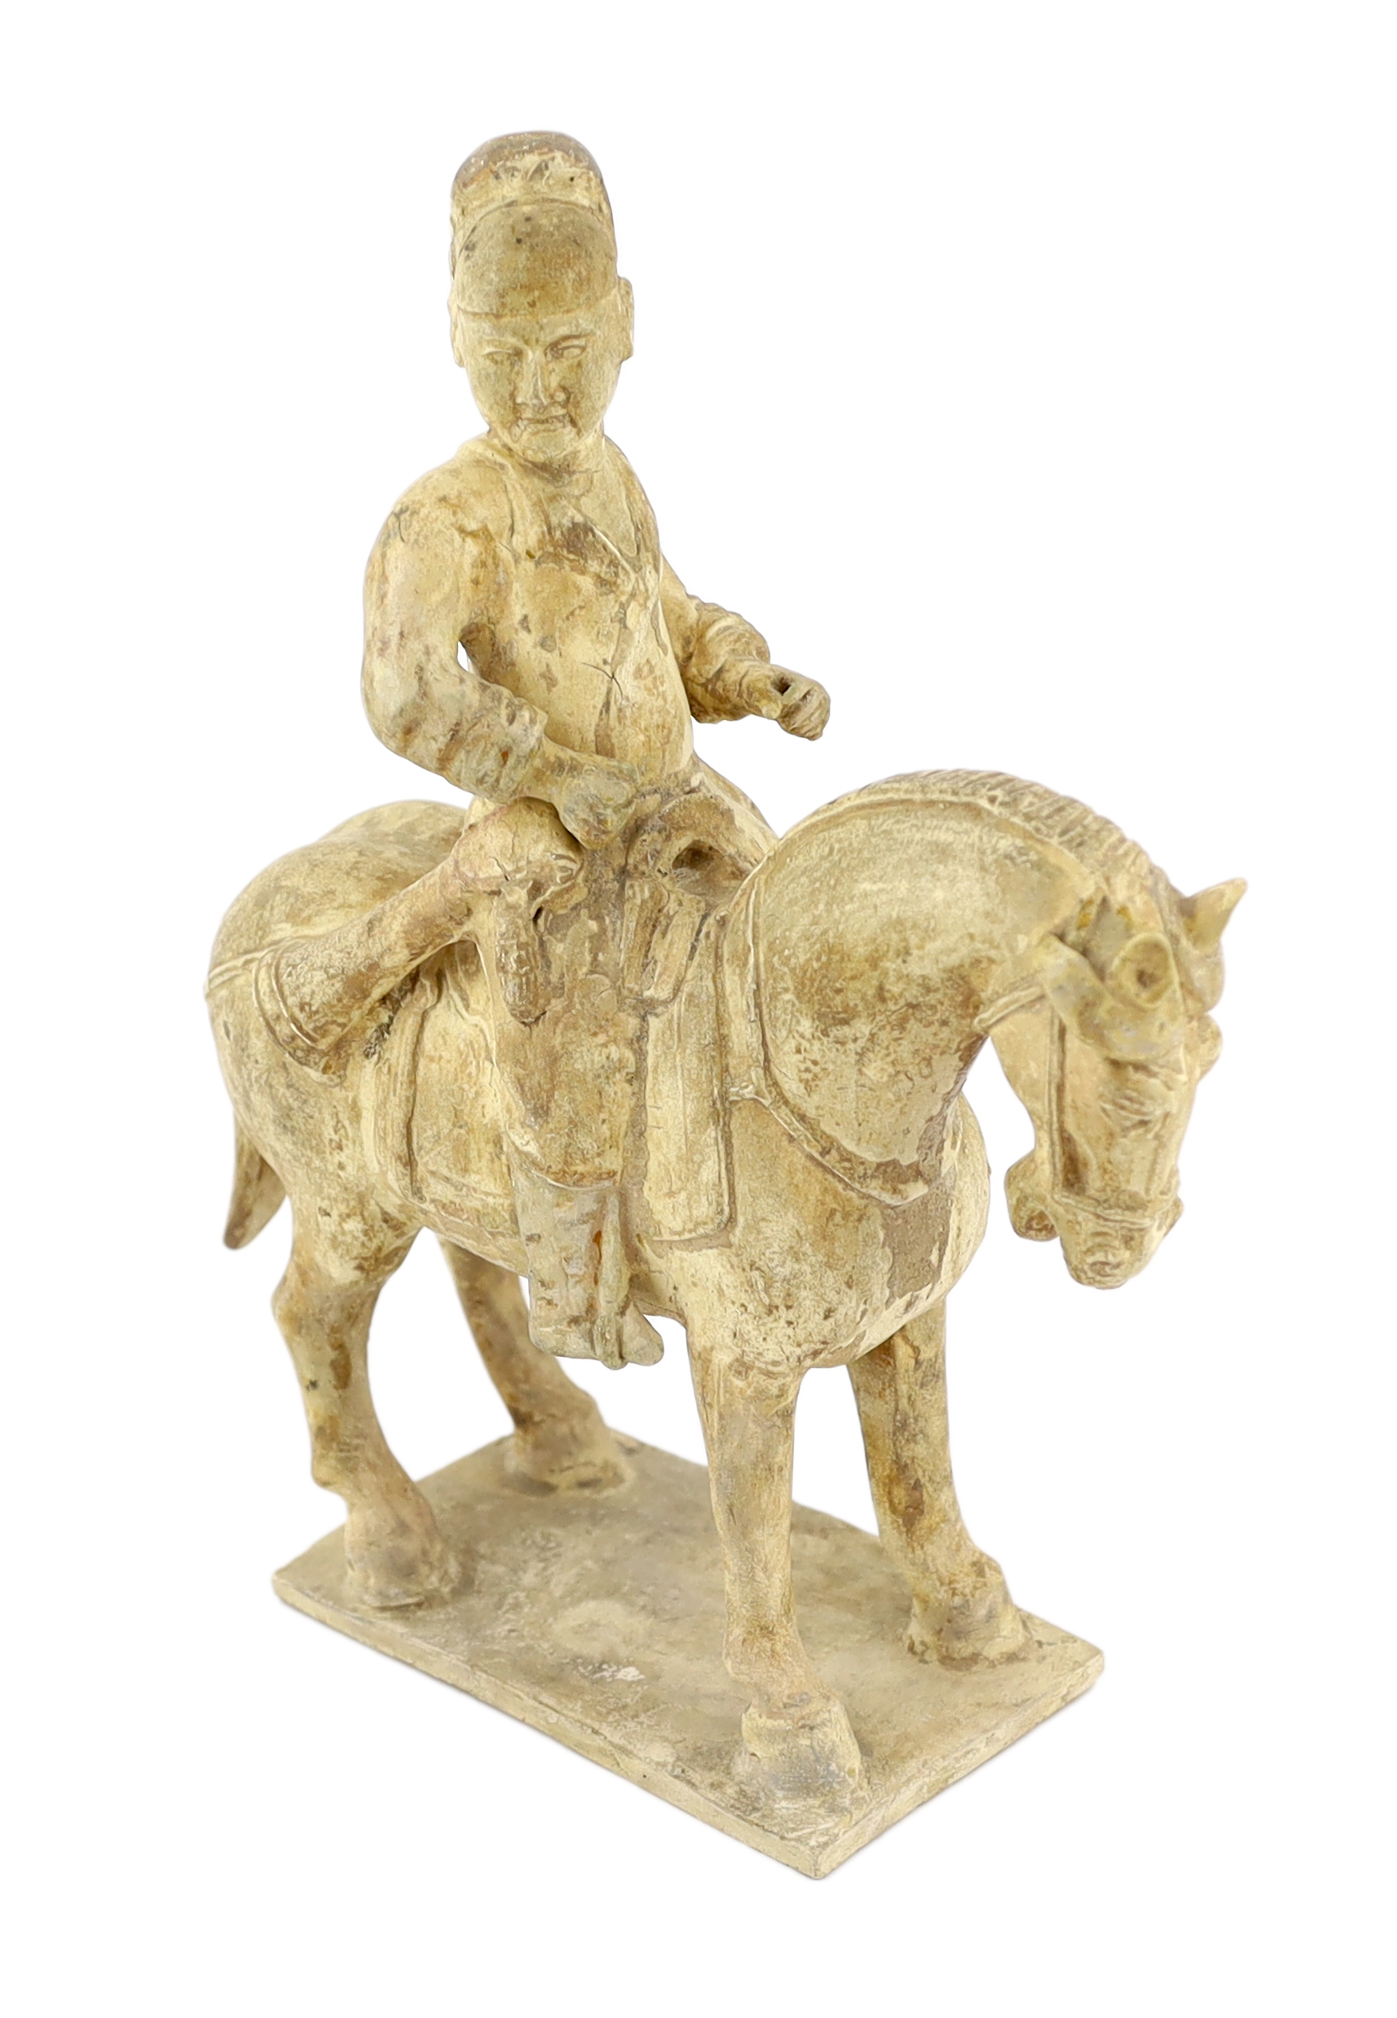 A Chinese cream glazed pottery model of an archer on horseback, Tang Dynasty (618-906 AD)